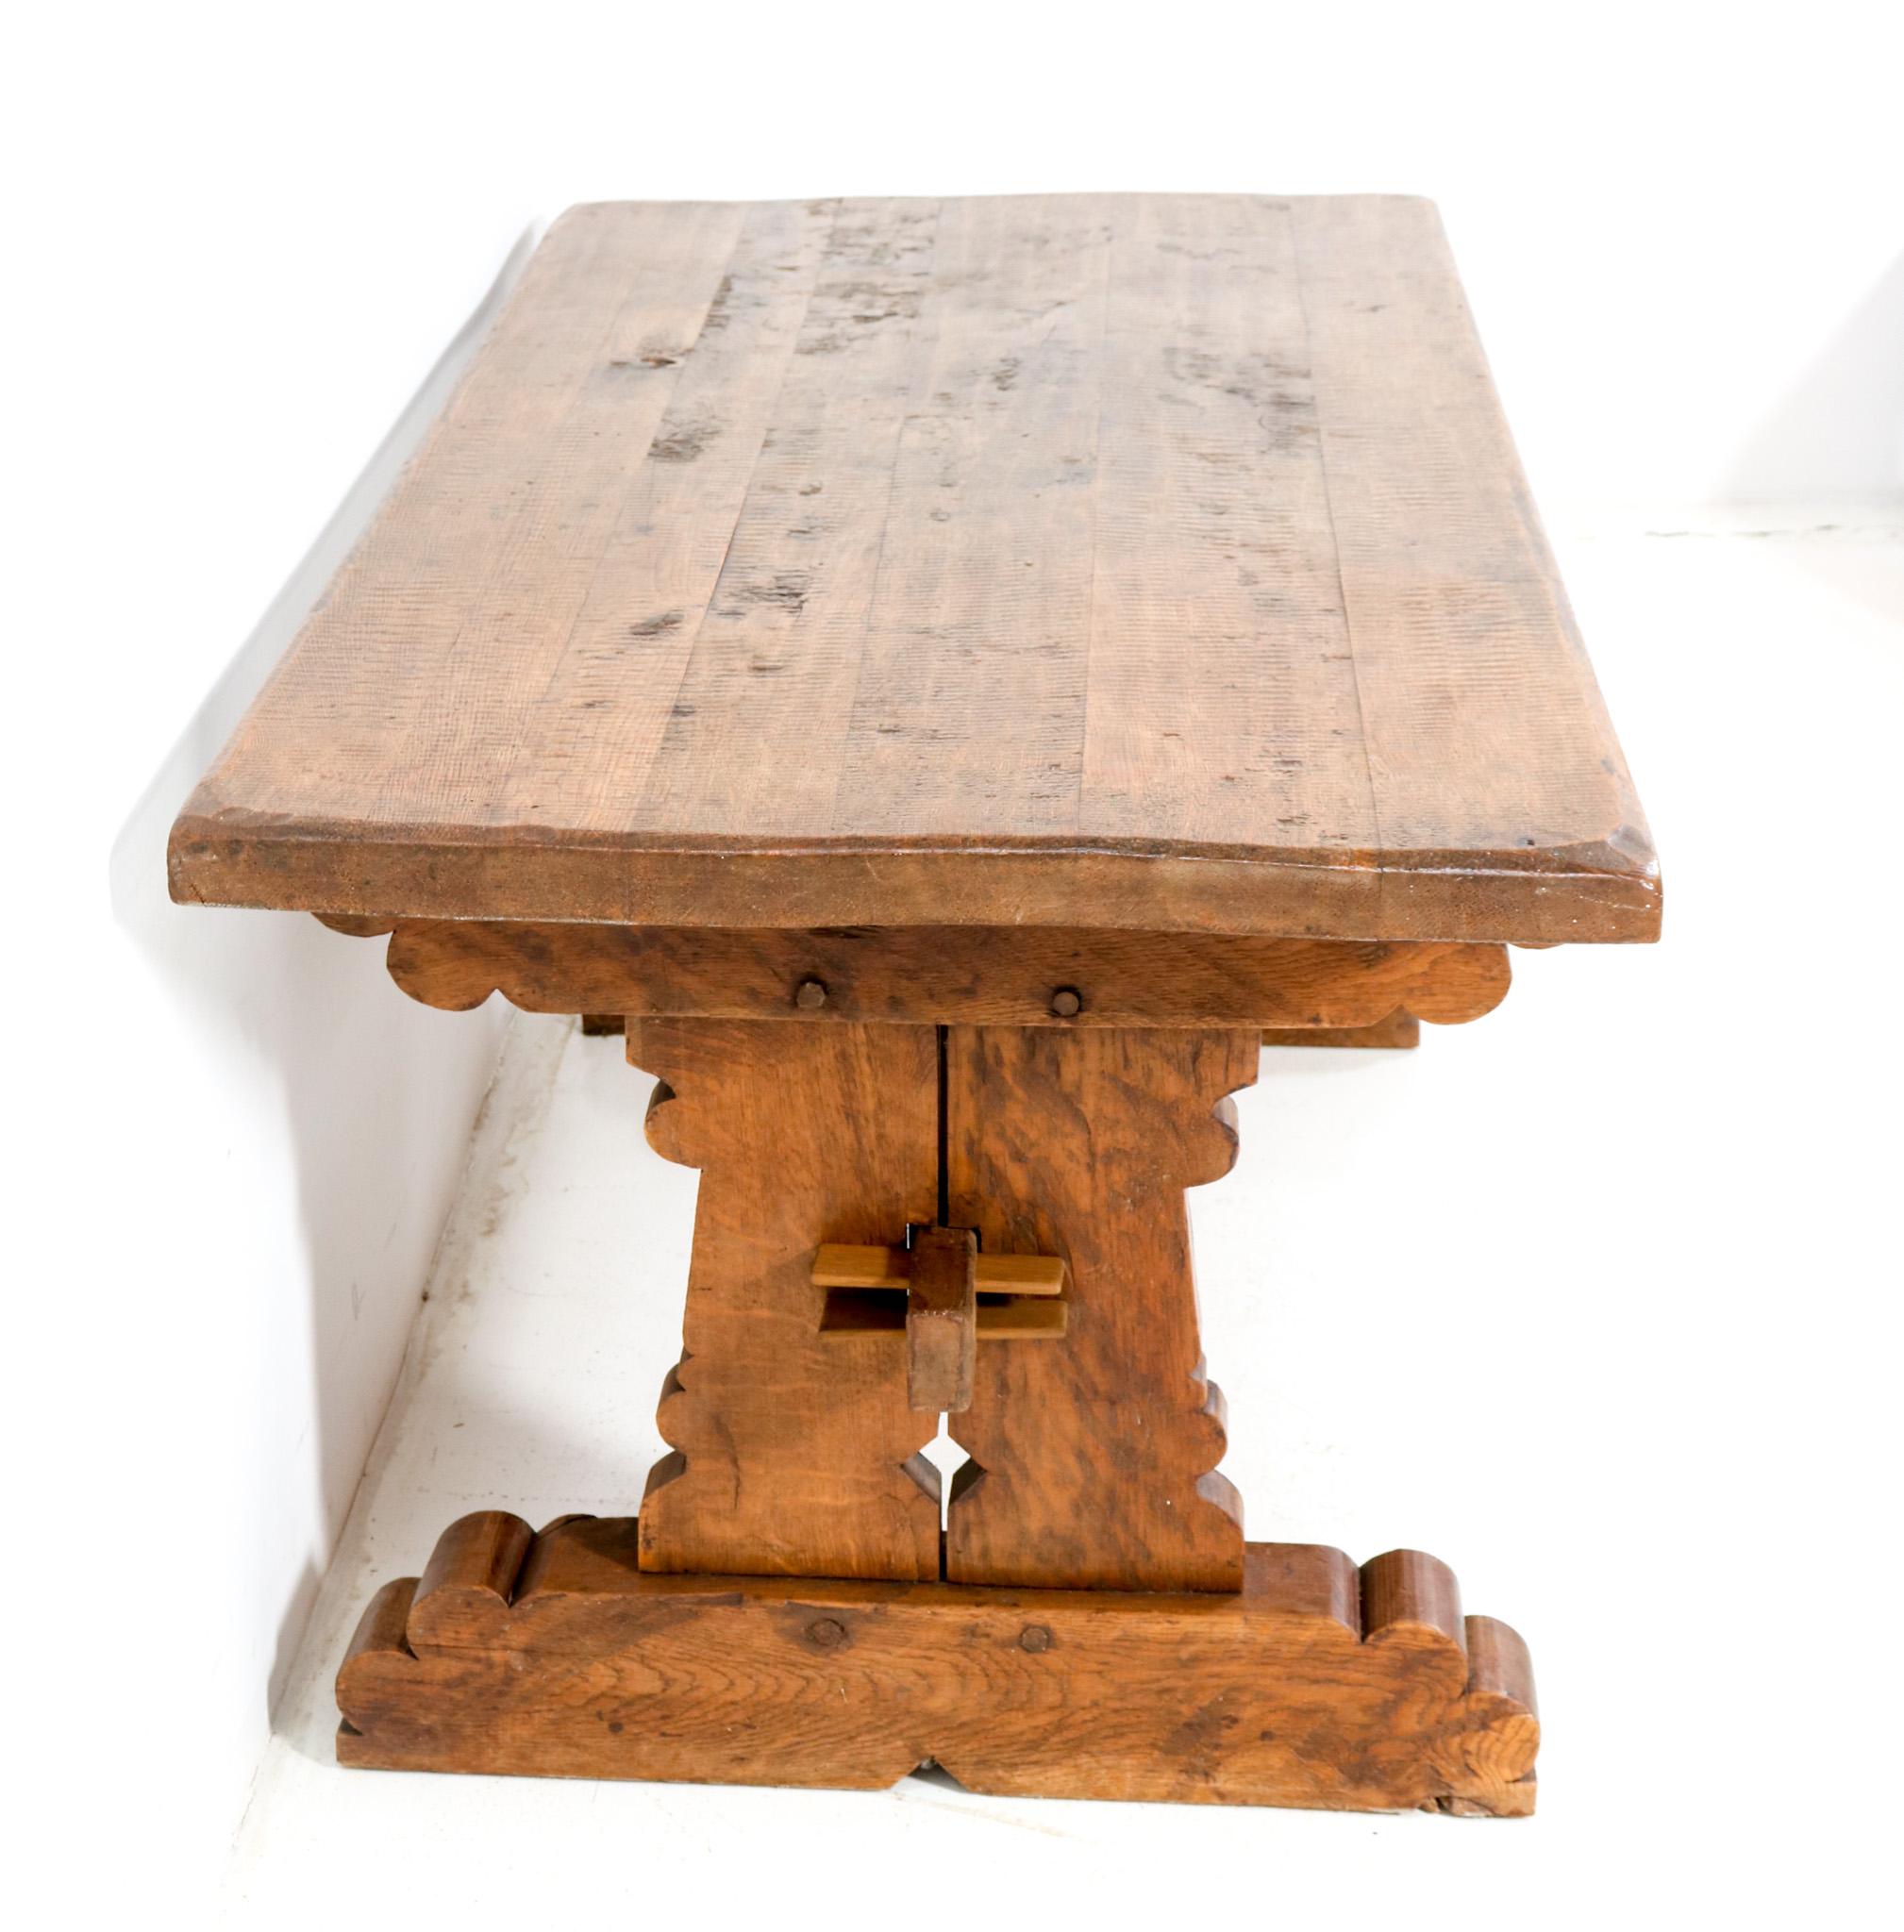 Dutch Oak Brutalist Dining Room Table or Refectory Table, 1970s For Sale